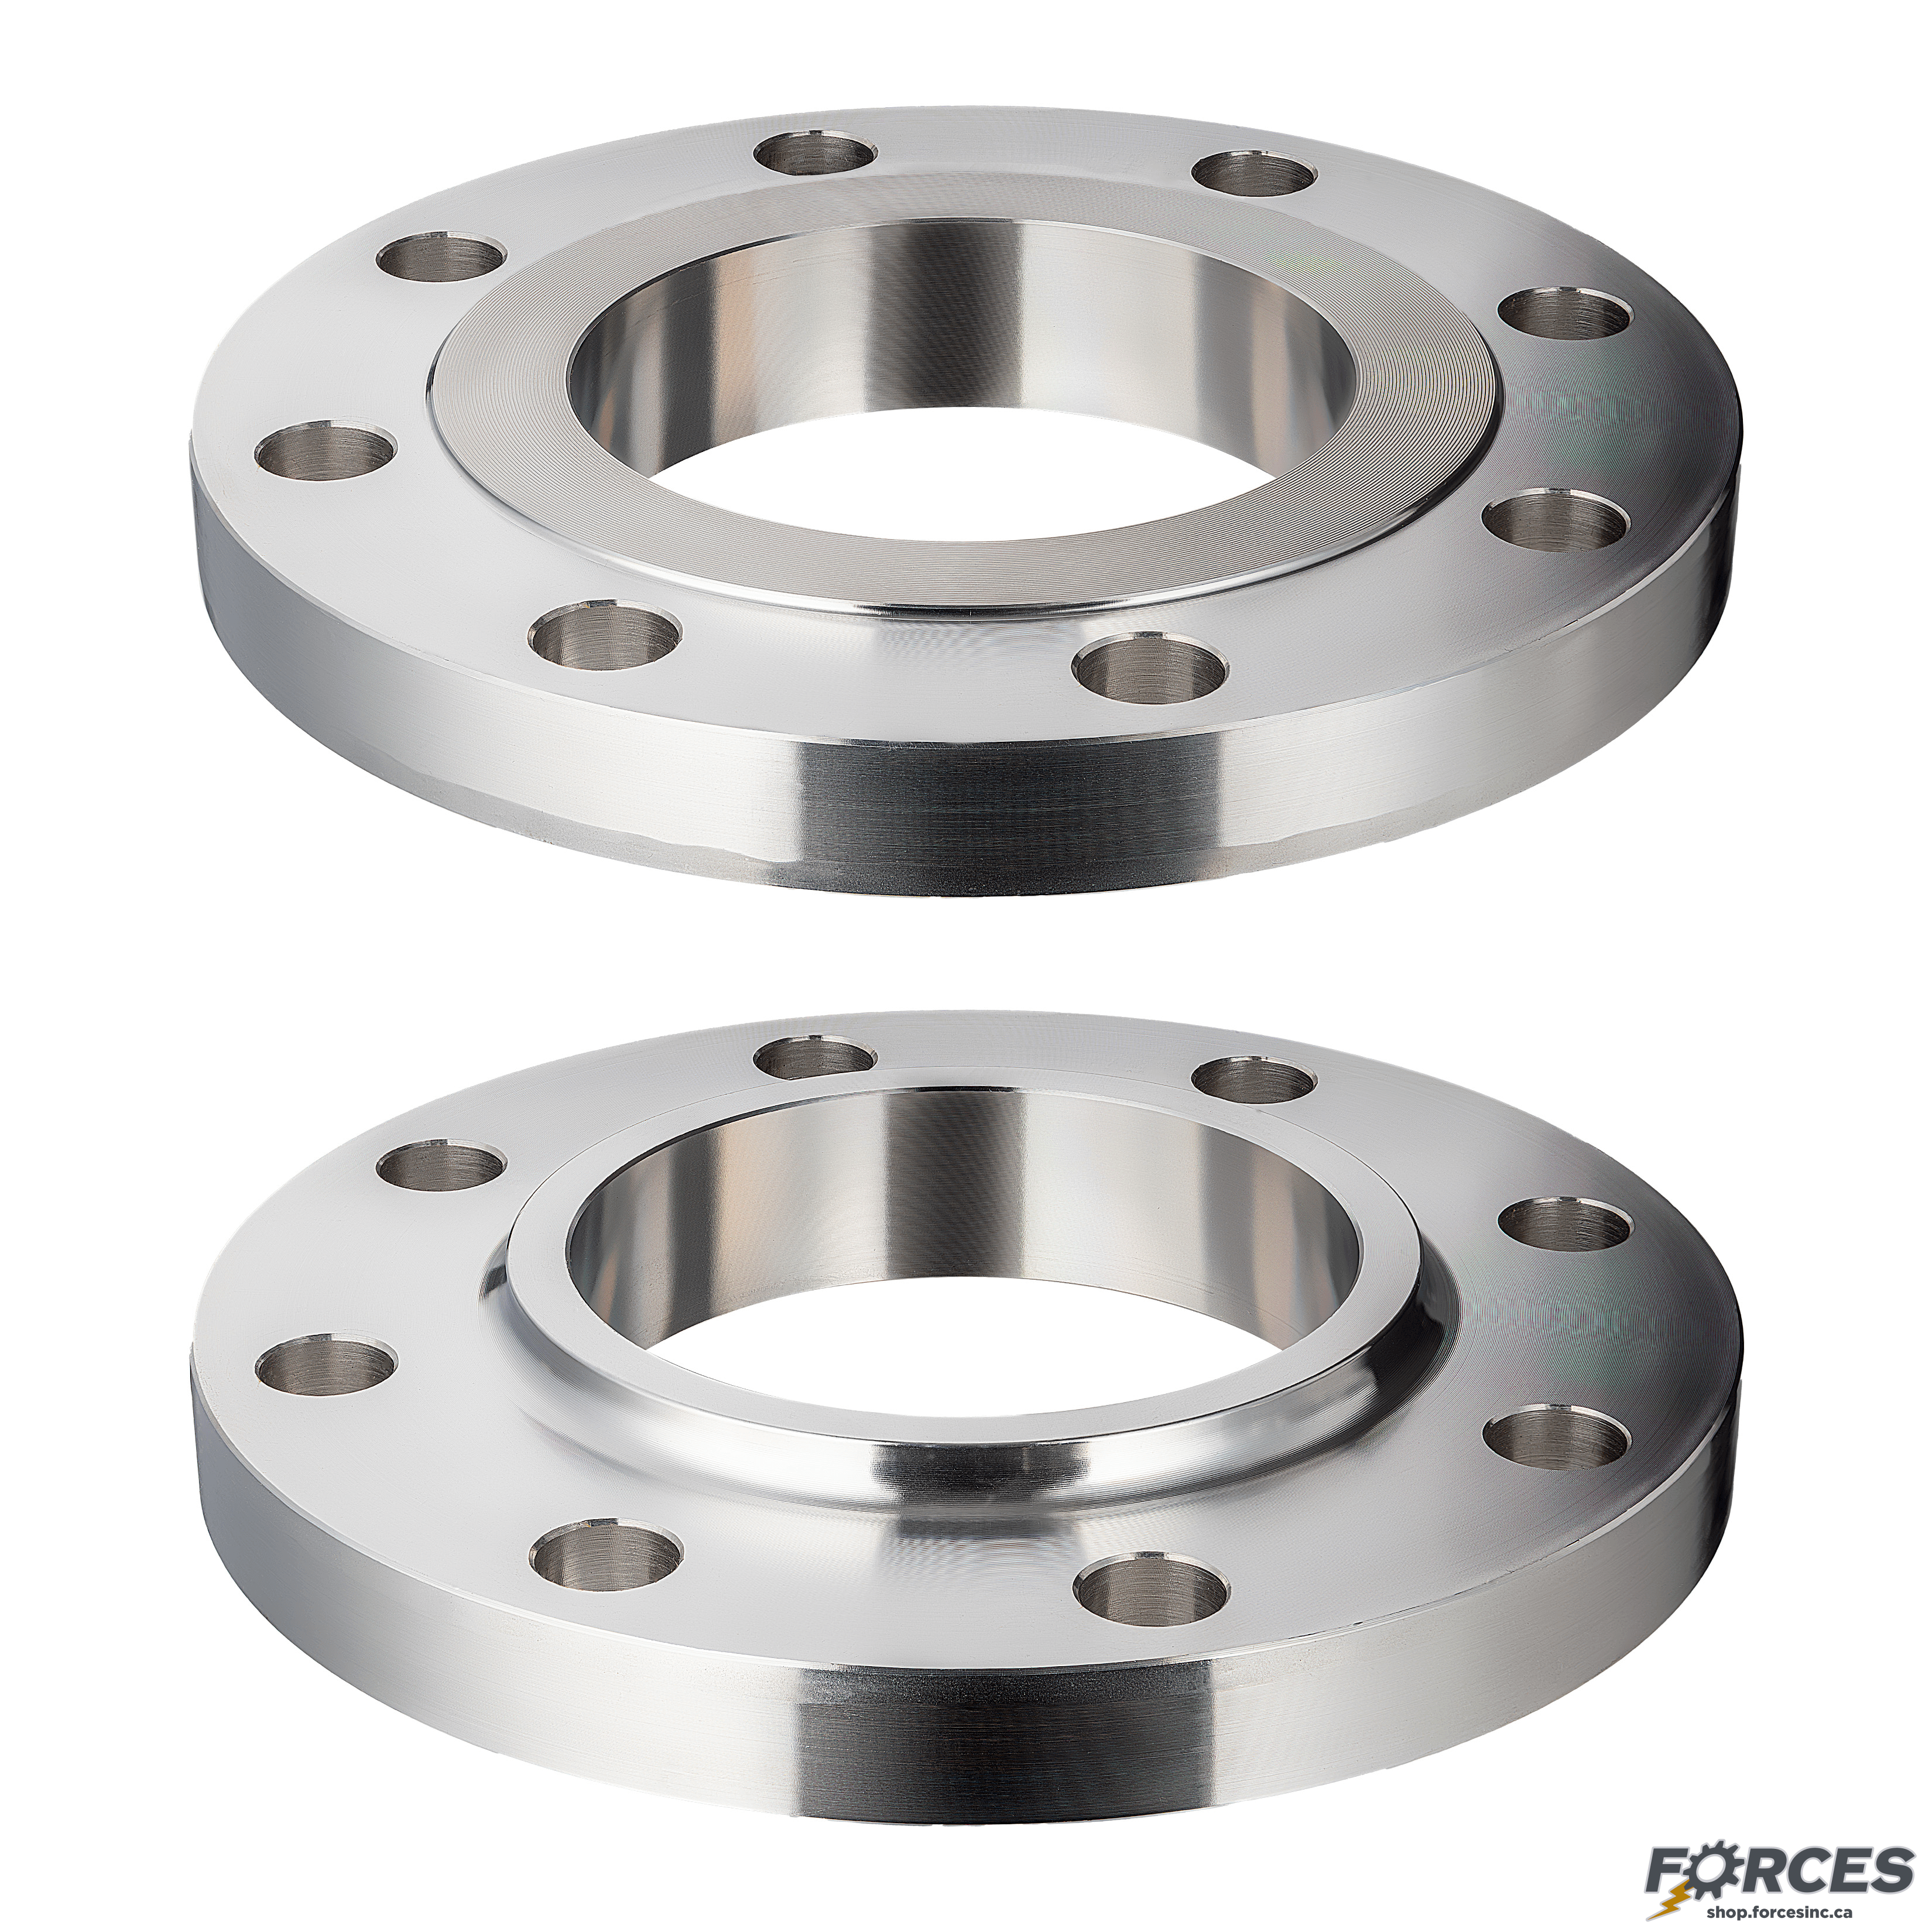 5" Slip-On Flange Class #150 - Stainless Steel 304 - Forces Inc